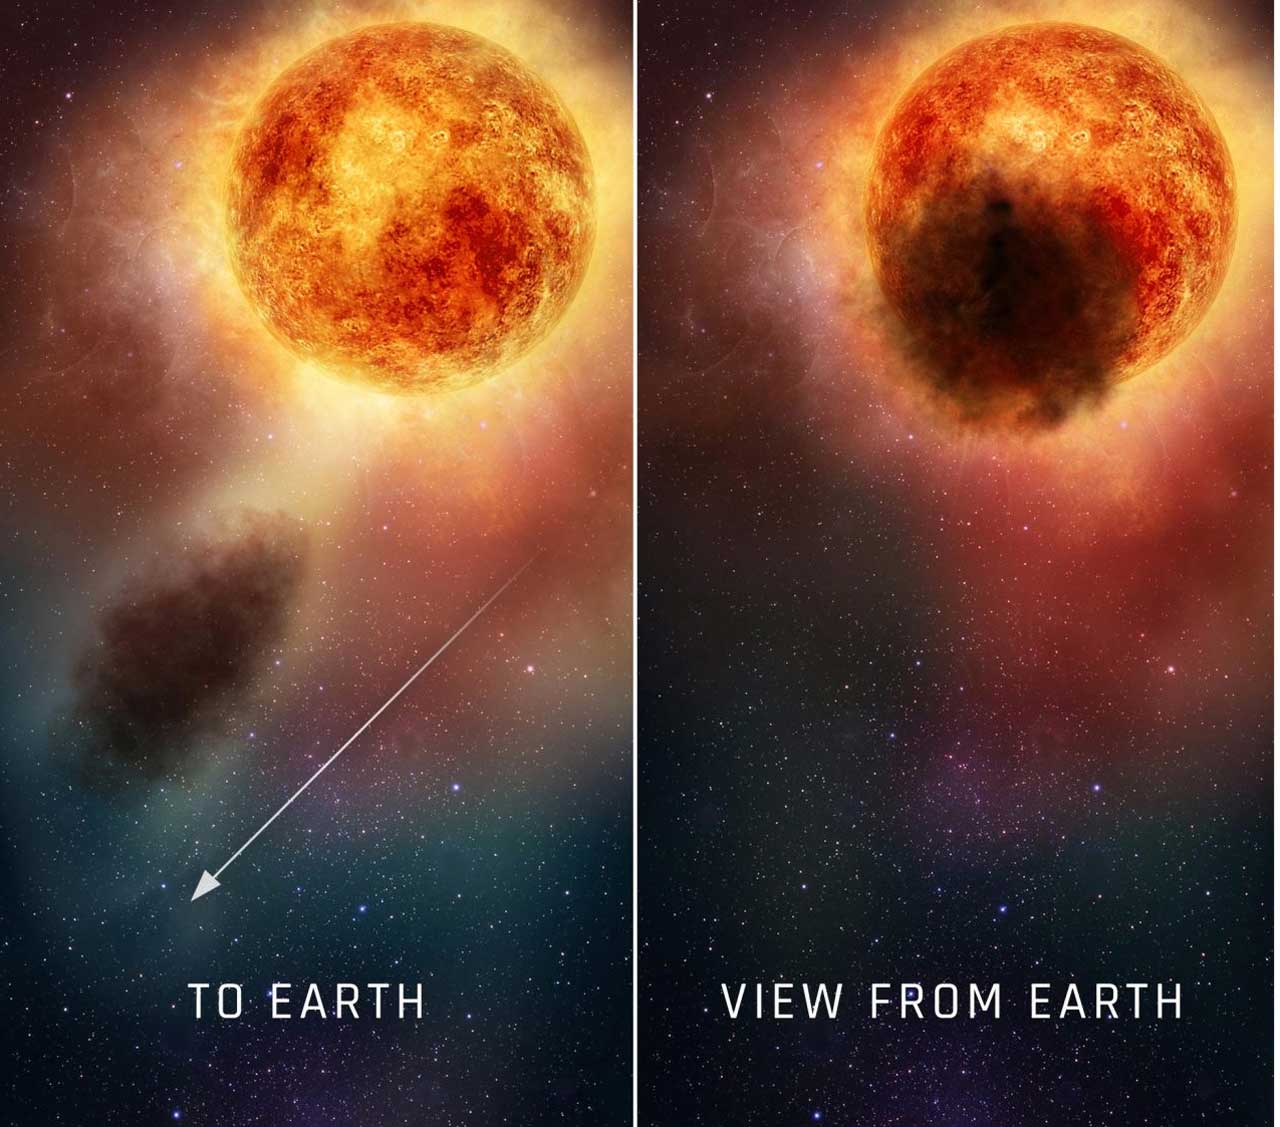 Betelgeuse may possibly be all set to go supernova